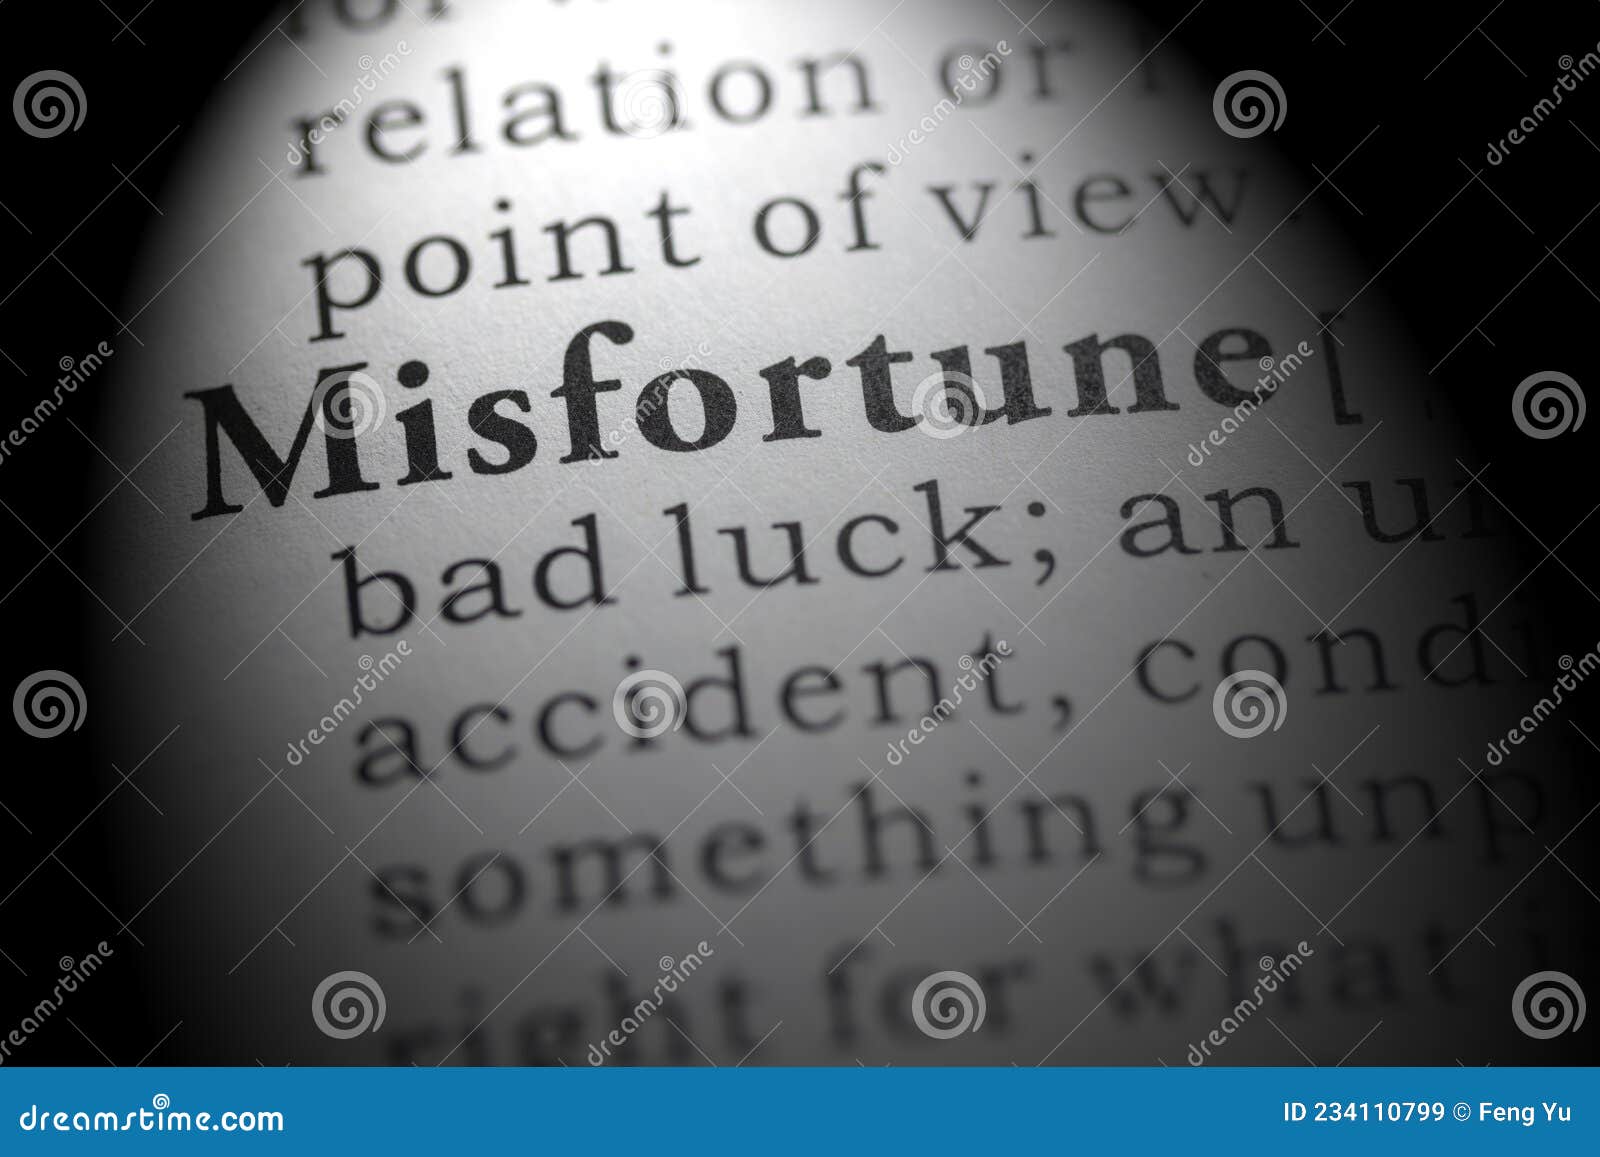 dictionary definition of misfortune